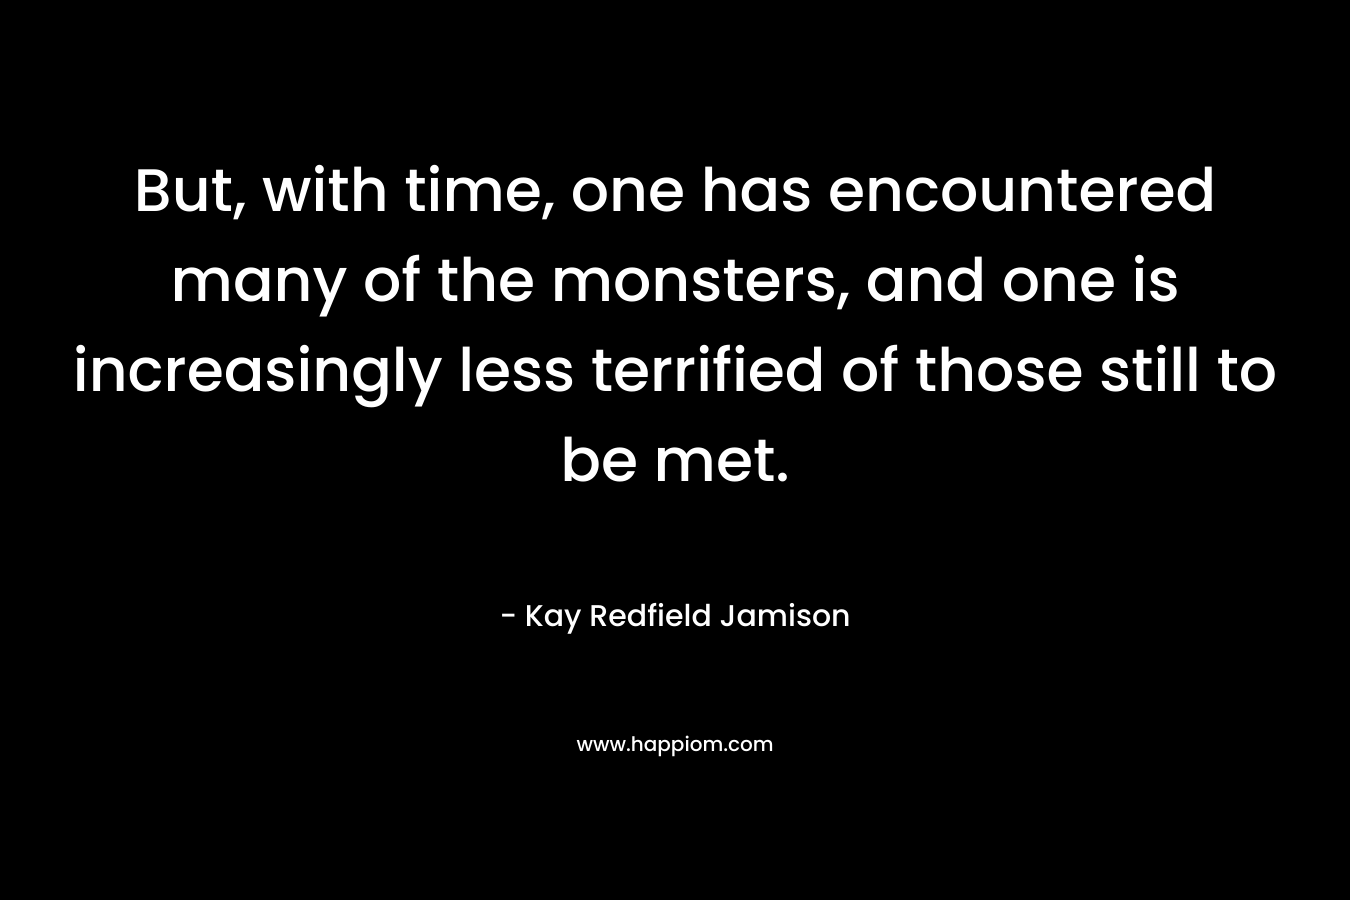 But, with time, one has encountered many of the monsters, and one is increasingly less terrified of those still to be met.